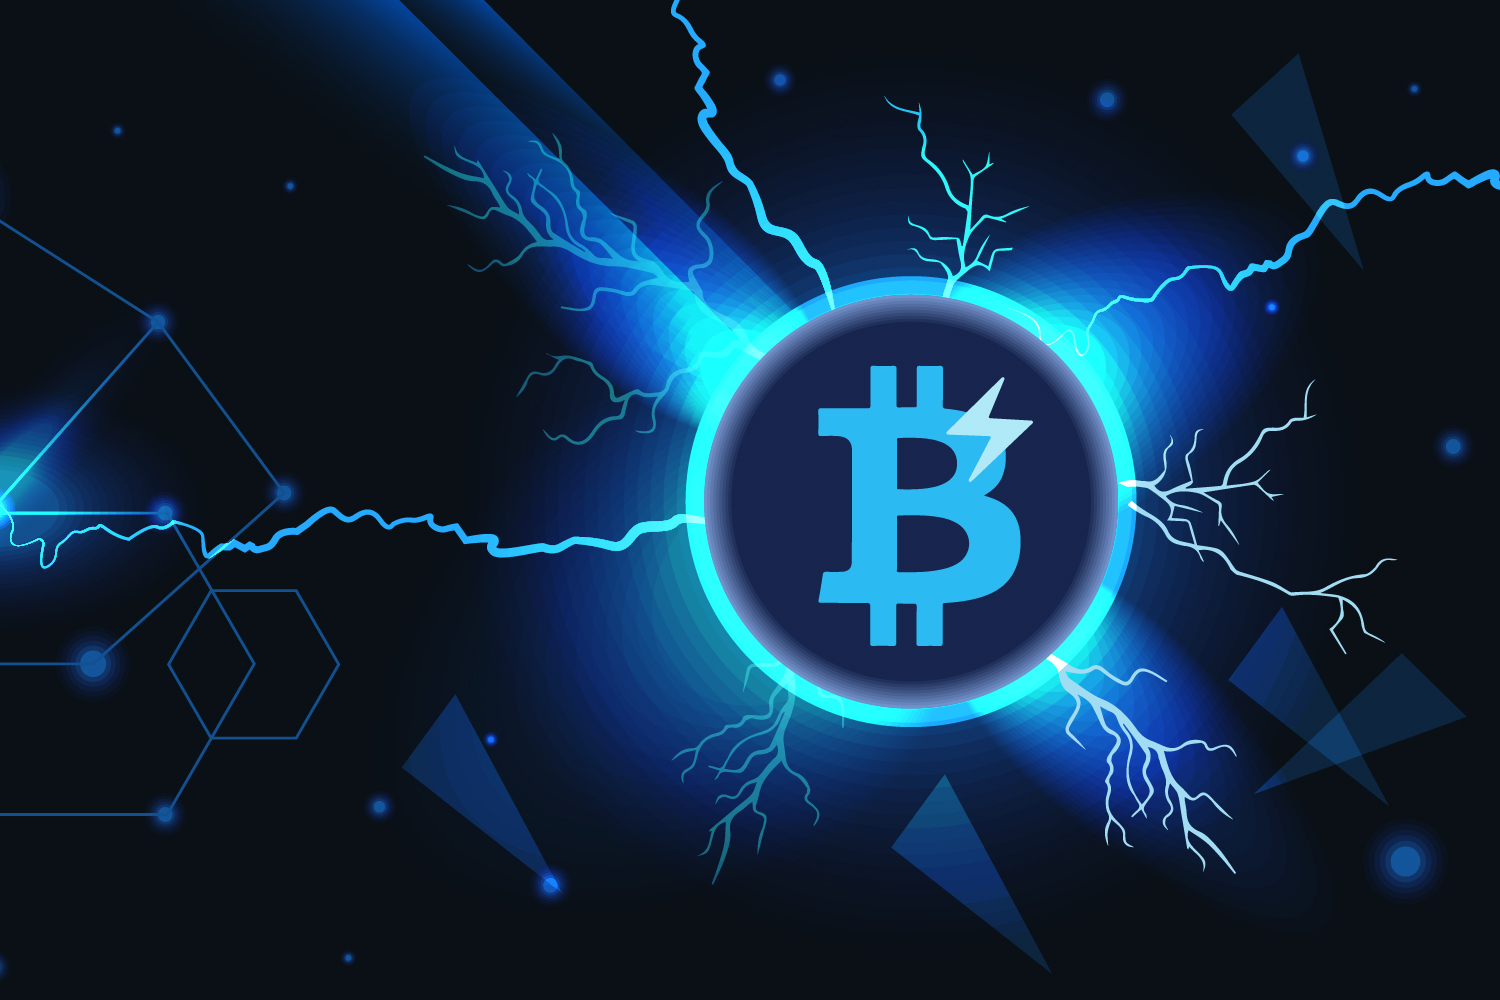 Bitcoin Lightning Network On Binance Records One Of The Fastest Rates Of Adoption